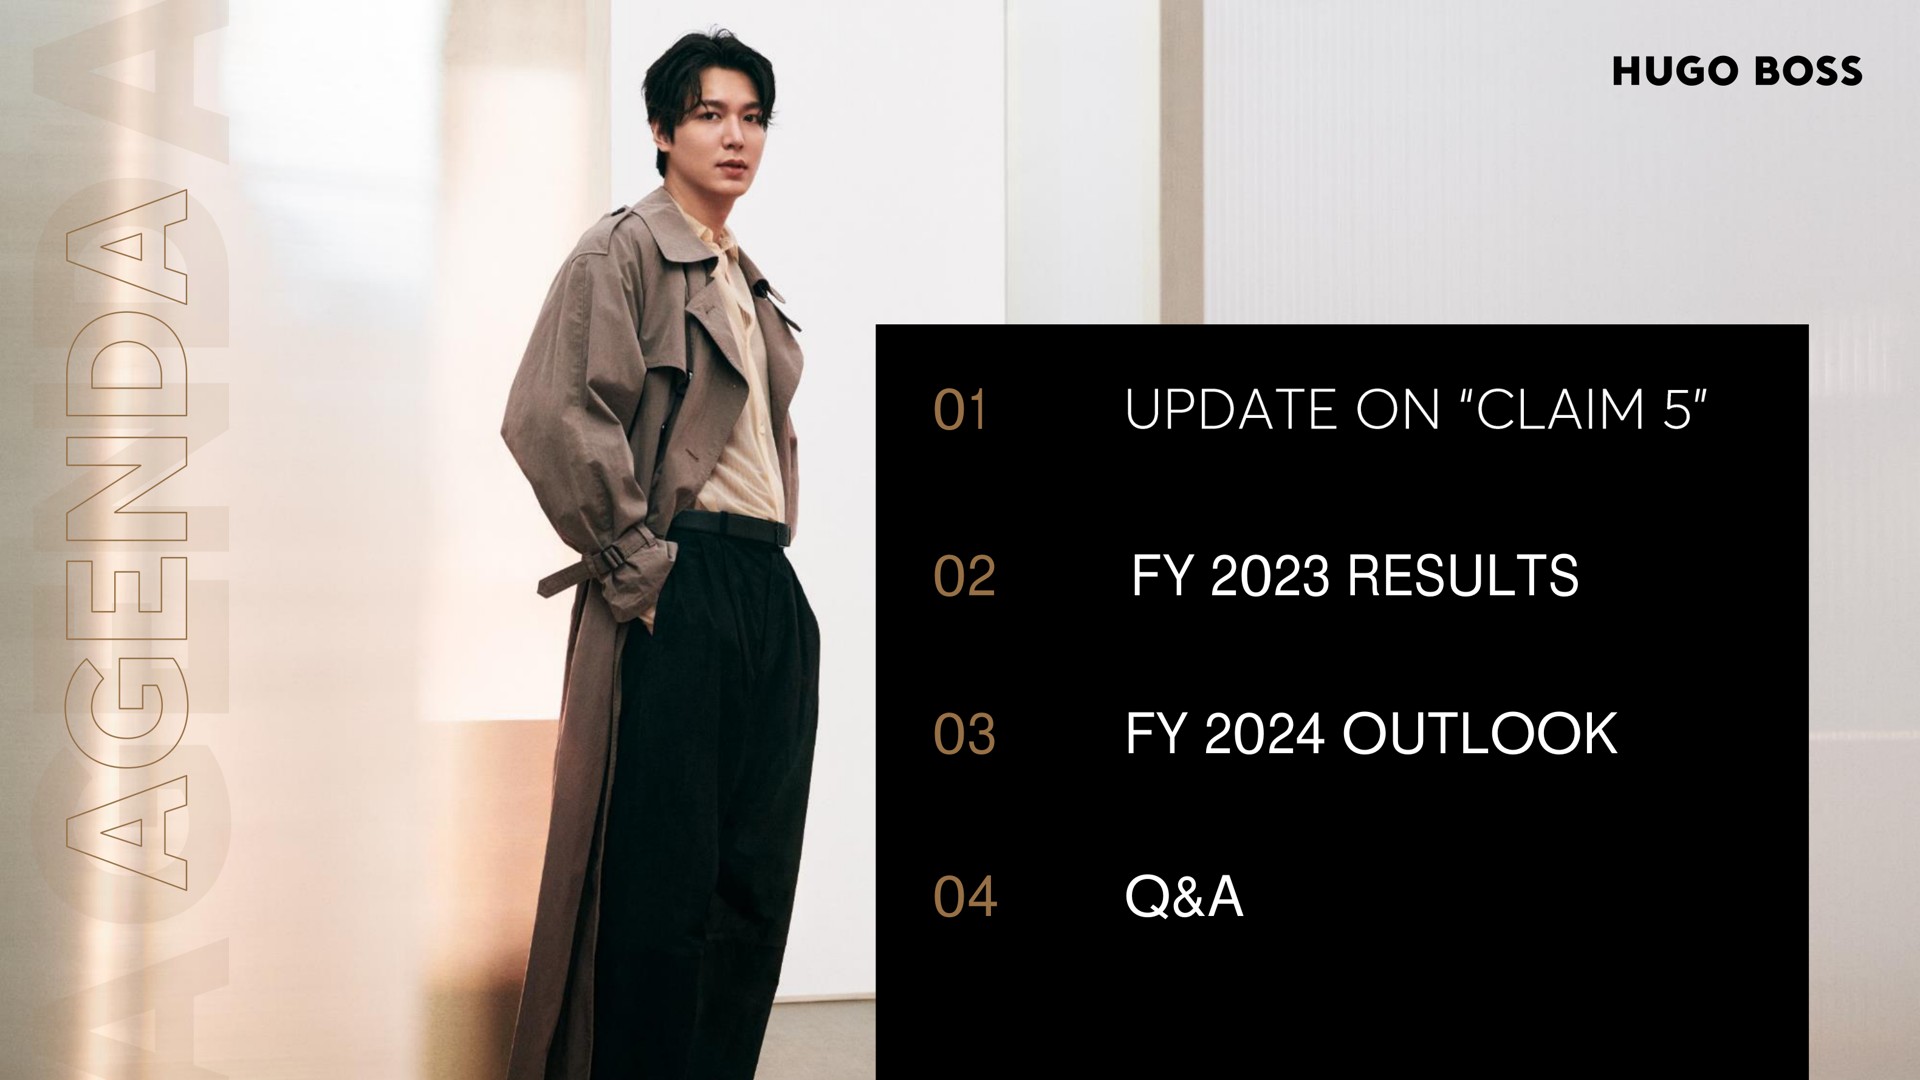 a a results outlook a boss update on claim | Hugo Boss